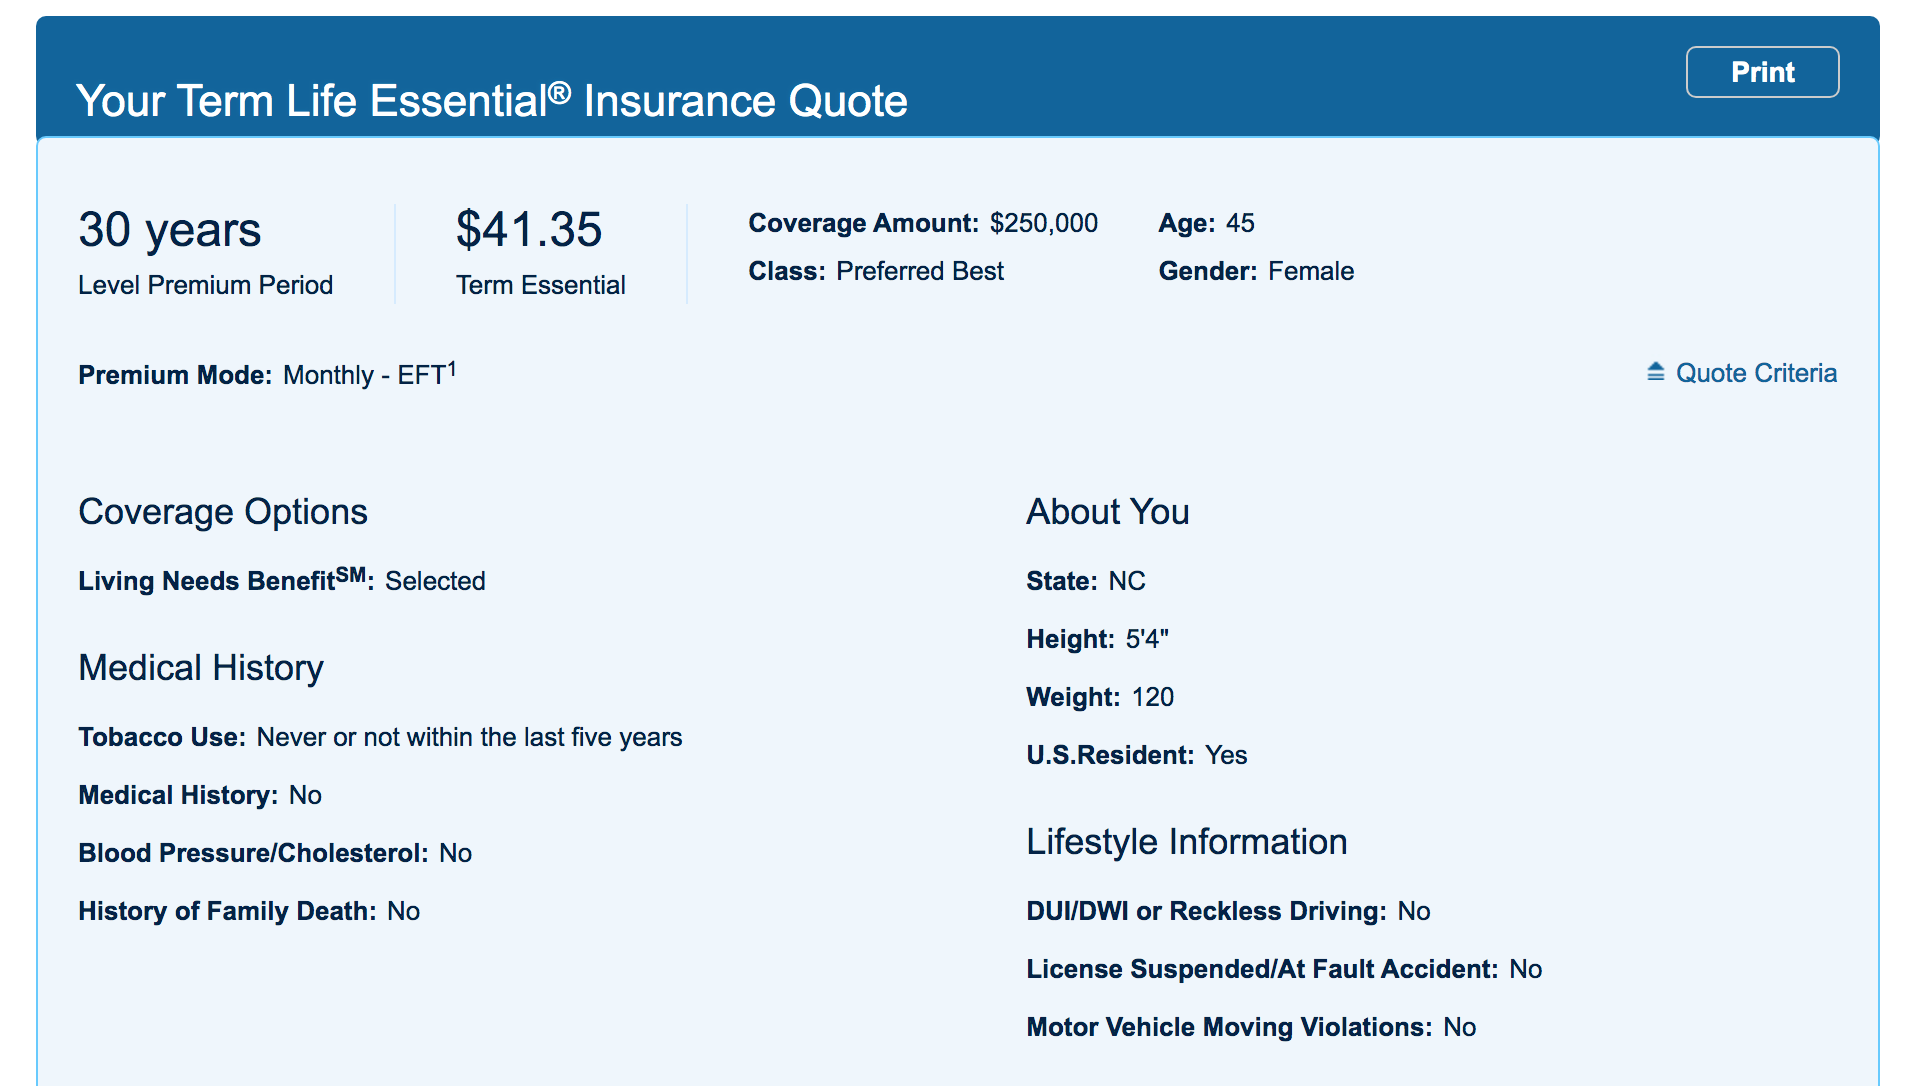 Prudential website Find a Life Insurance Policy page insurance quote results